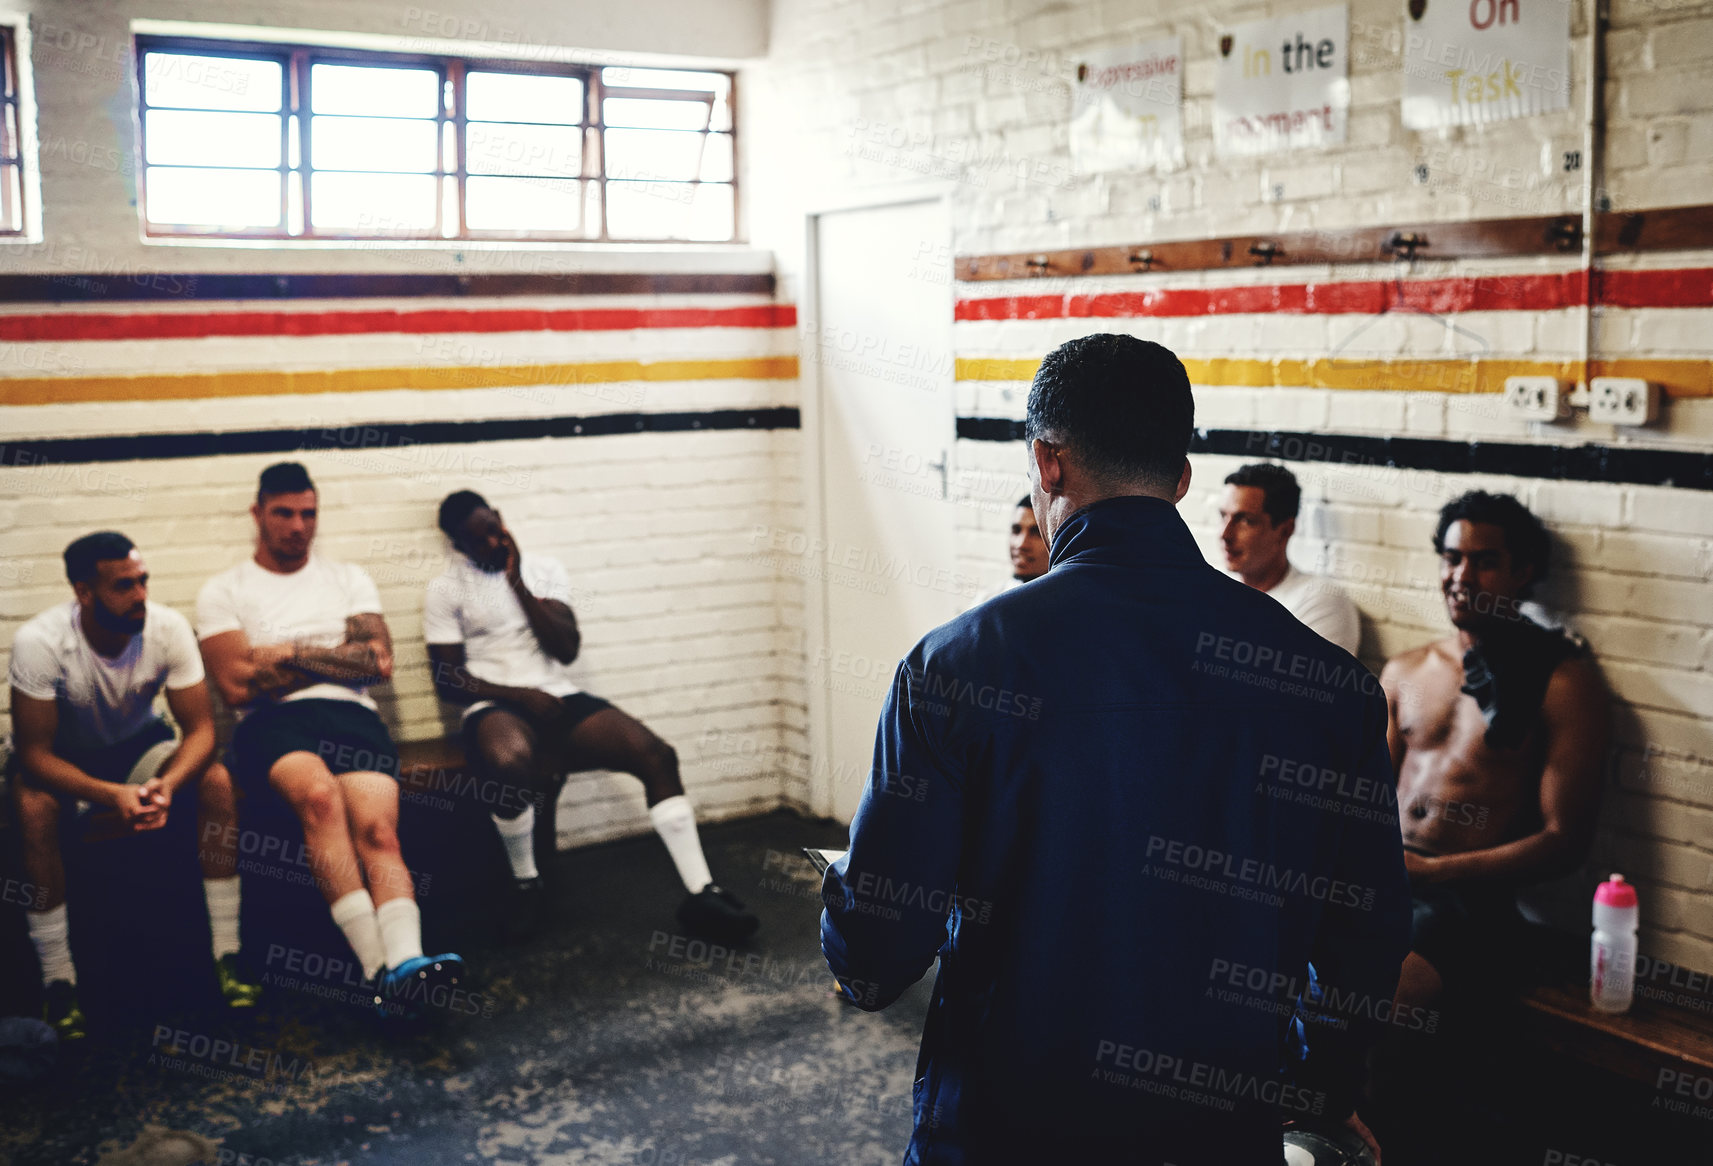 Buy stock photo Cropped shot of a rugby coach addressing his team players in a locker room during the day